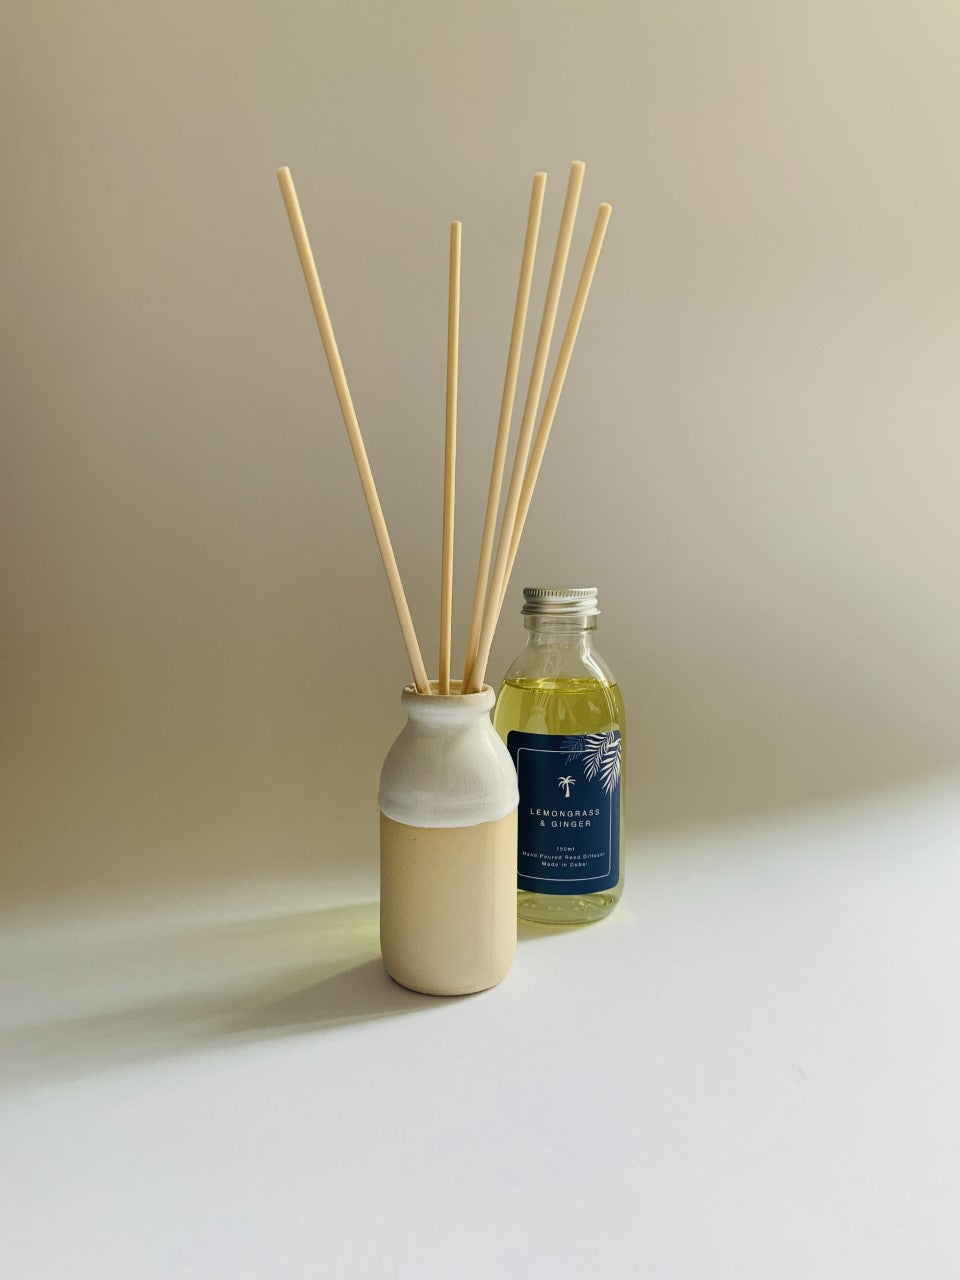 Tuberose and Jasmine Reed Diffusers from room fragrance brand, The Oasis Candle Co